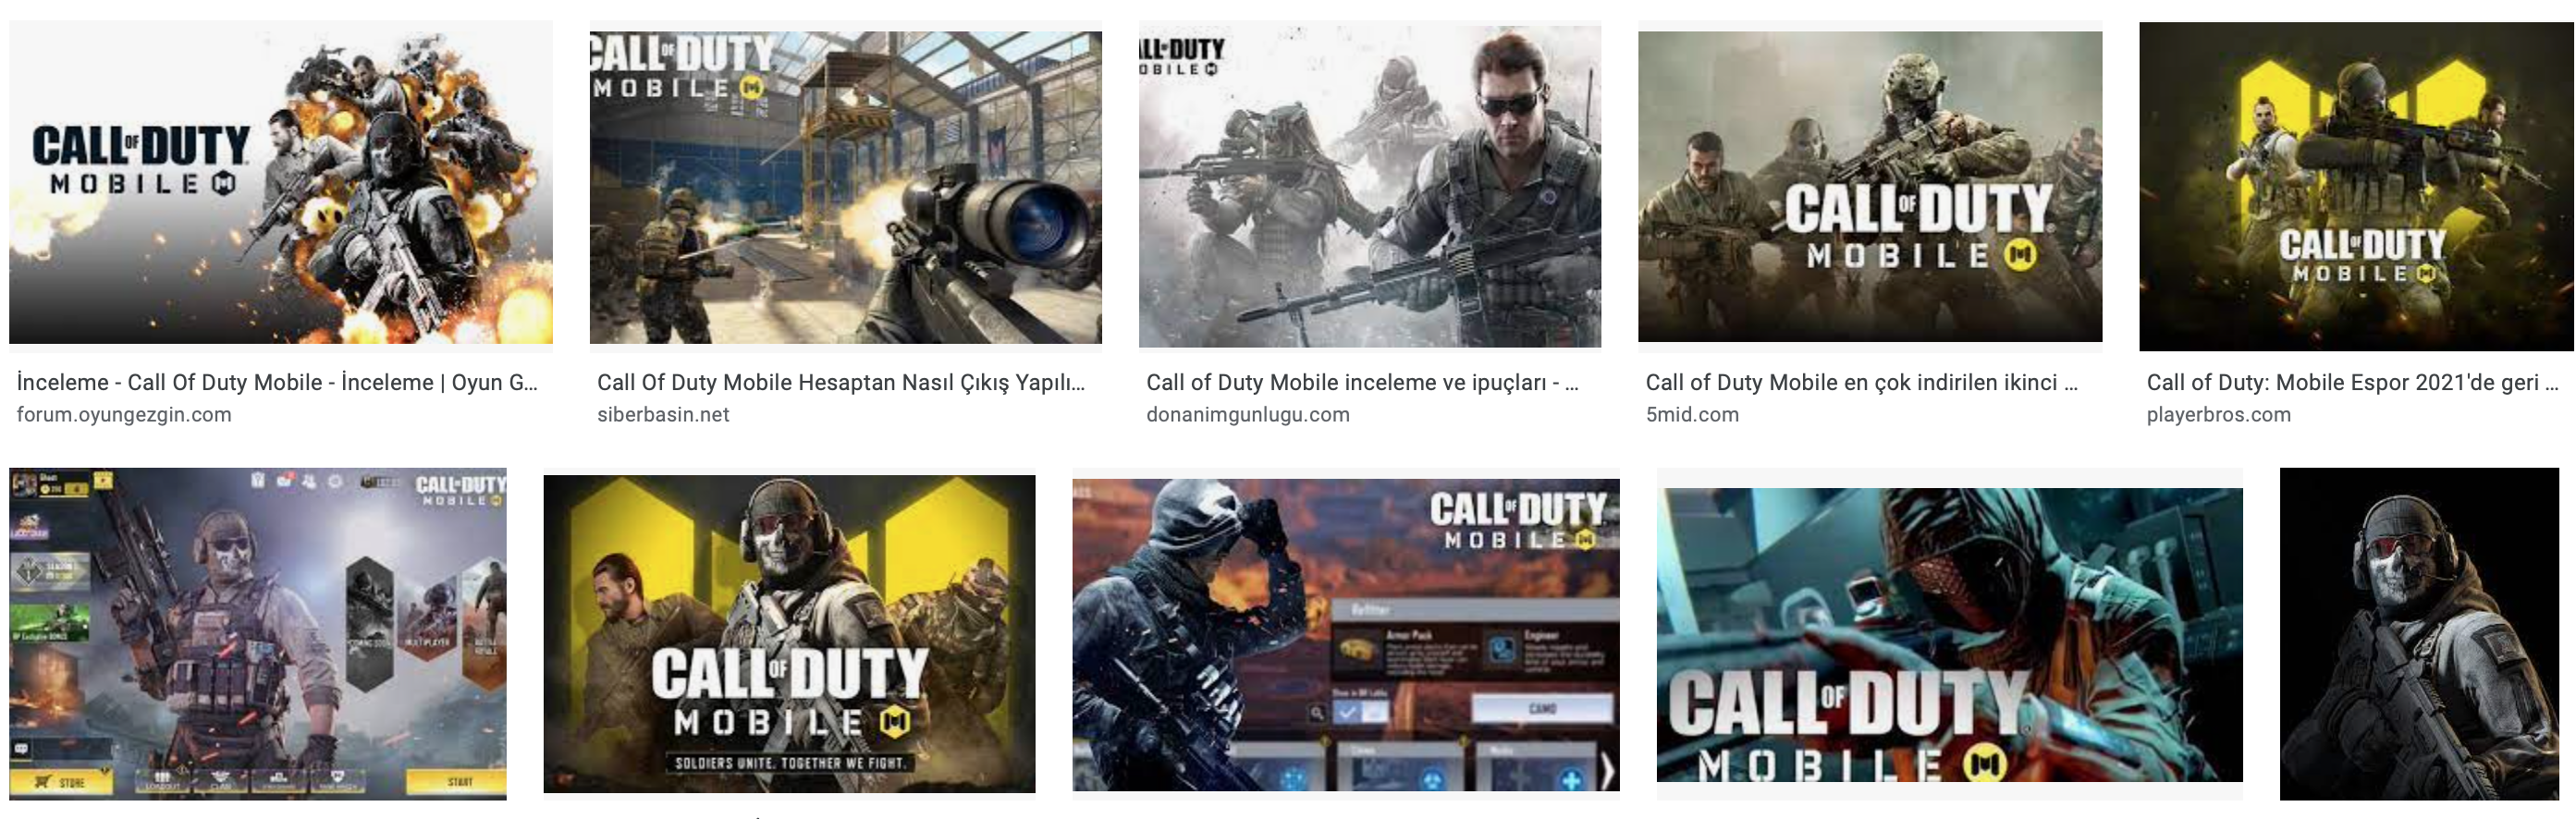 Call Of Duty Mobile Apk 2021